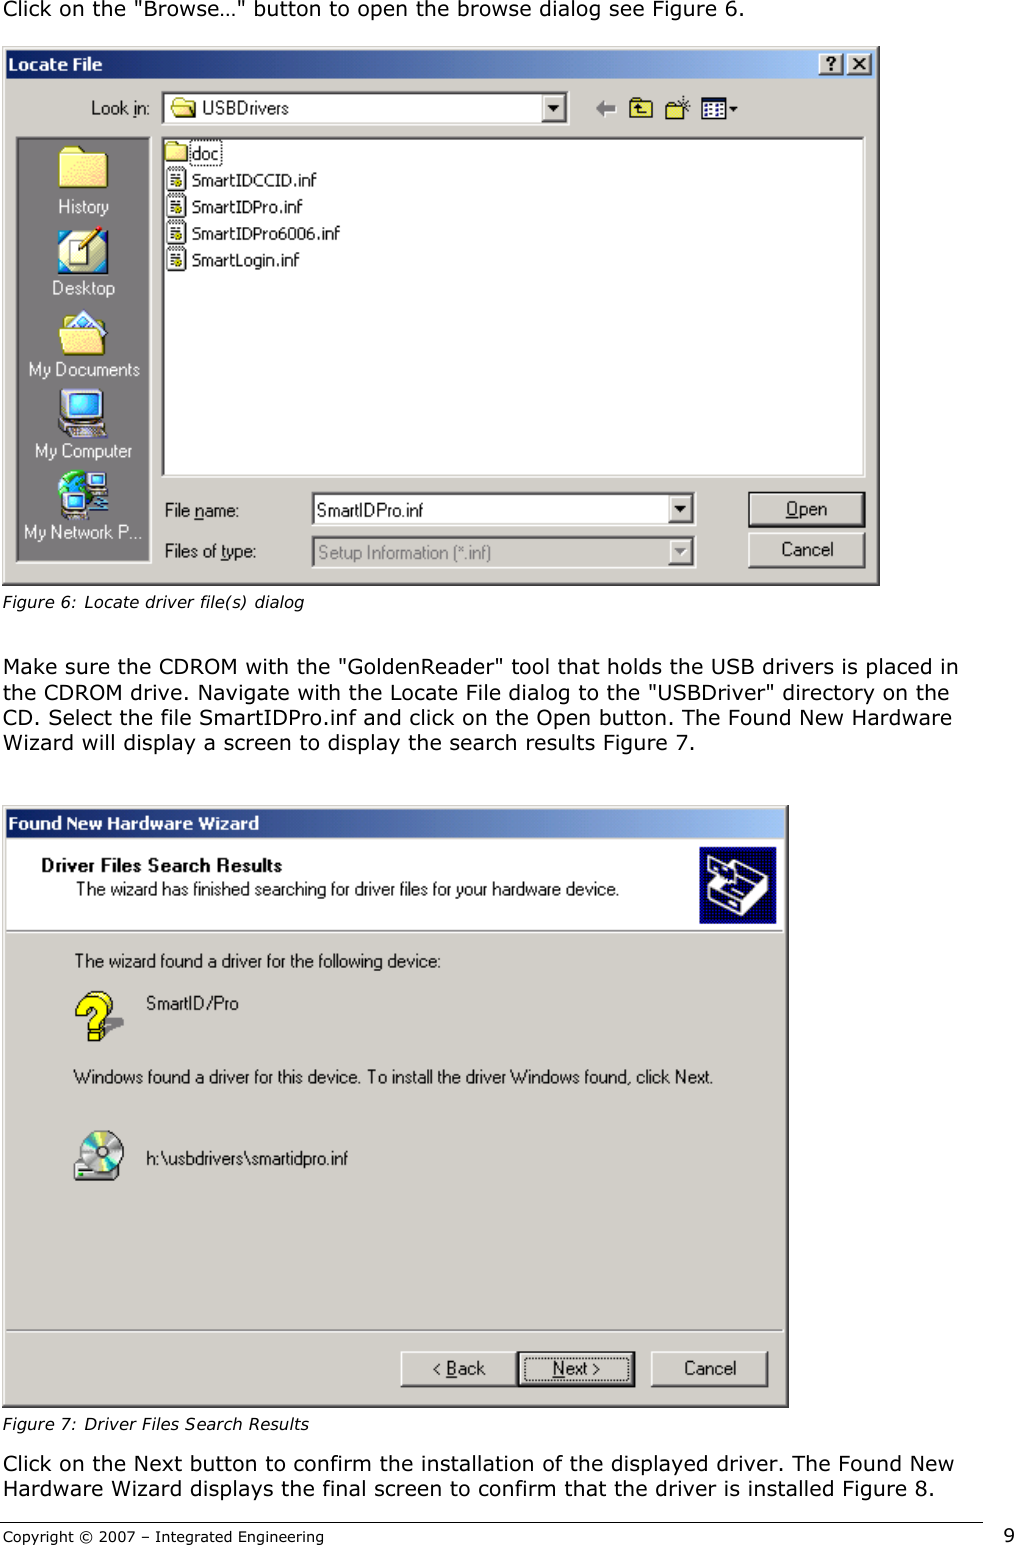 Copyright © 2007 – Integrated Engineering   9 Click on the &quot;Browse…&quot; button to open the browse dialog see Figure 6.   Figure 6: Locate driver file(s) dialog  Make sure the CDROM with the &quot;GoldenReader&quot; tool that holds the USB drivers is placed in the CDROM drive. Navigate with the Locate File dialog to the &quot;USBDriver&quot; directory on the CD. Select the file SmartIDPro.inf and click on the Open button. The Found New Hardware Wizard will display a screen to display the search results Figure 7.    Figure 7: Driver Files Search Results Click on the Next button to confirm the installation of the displayed driver. The Found New Hardware Wizard displays the final screen to confirm that the driver is installed Figure 8. 